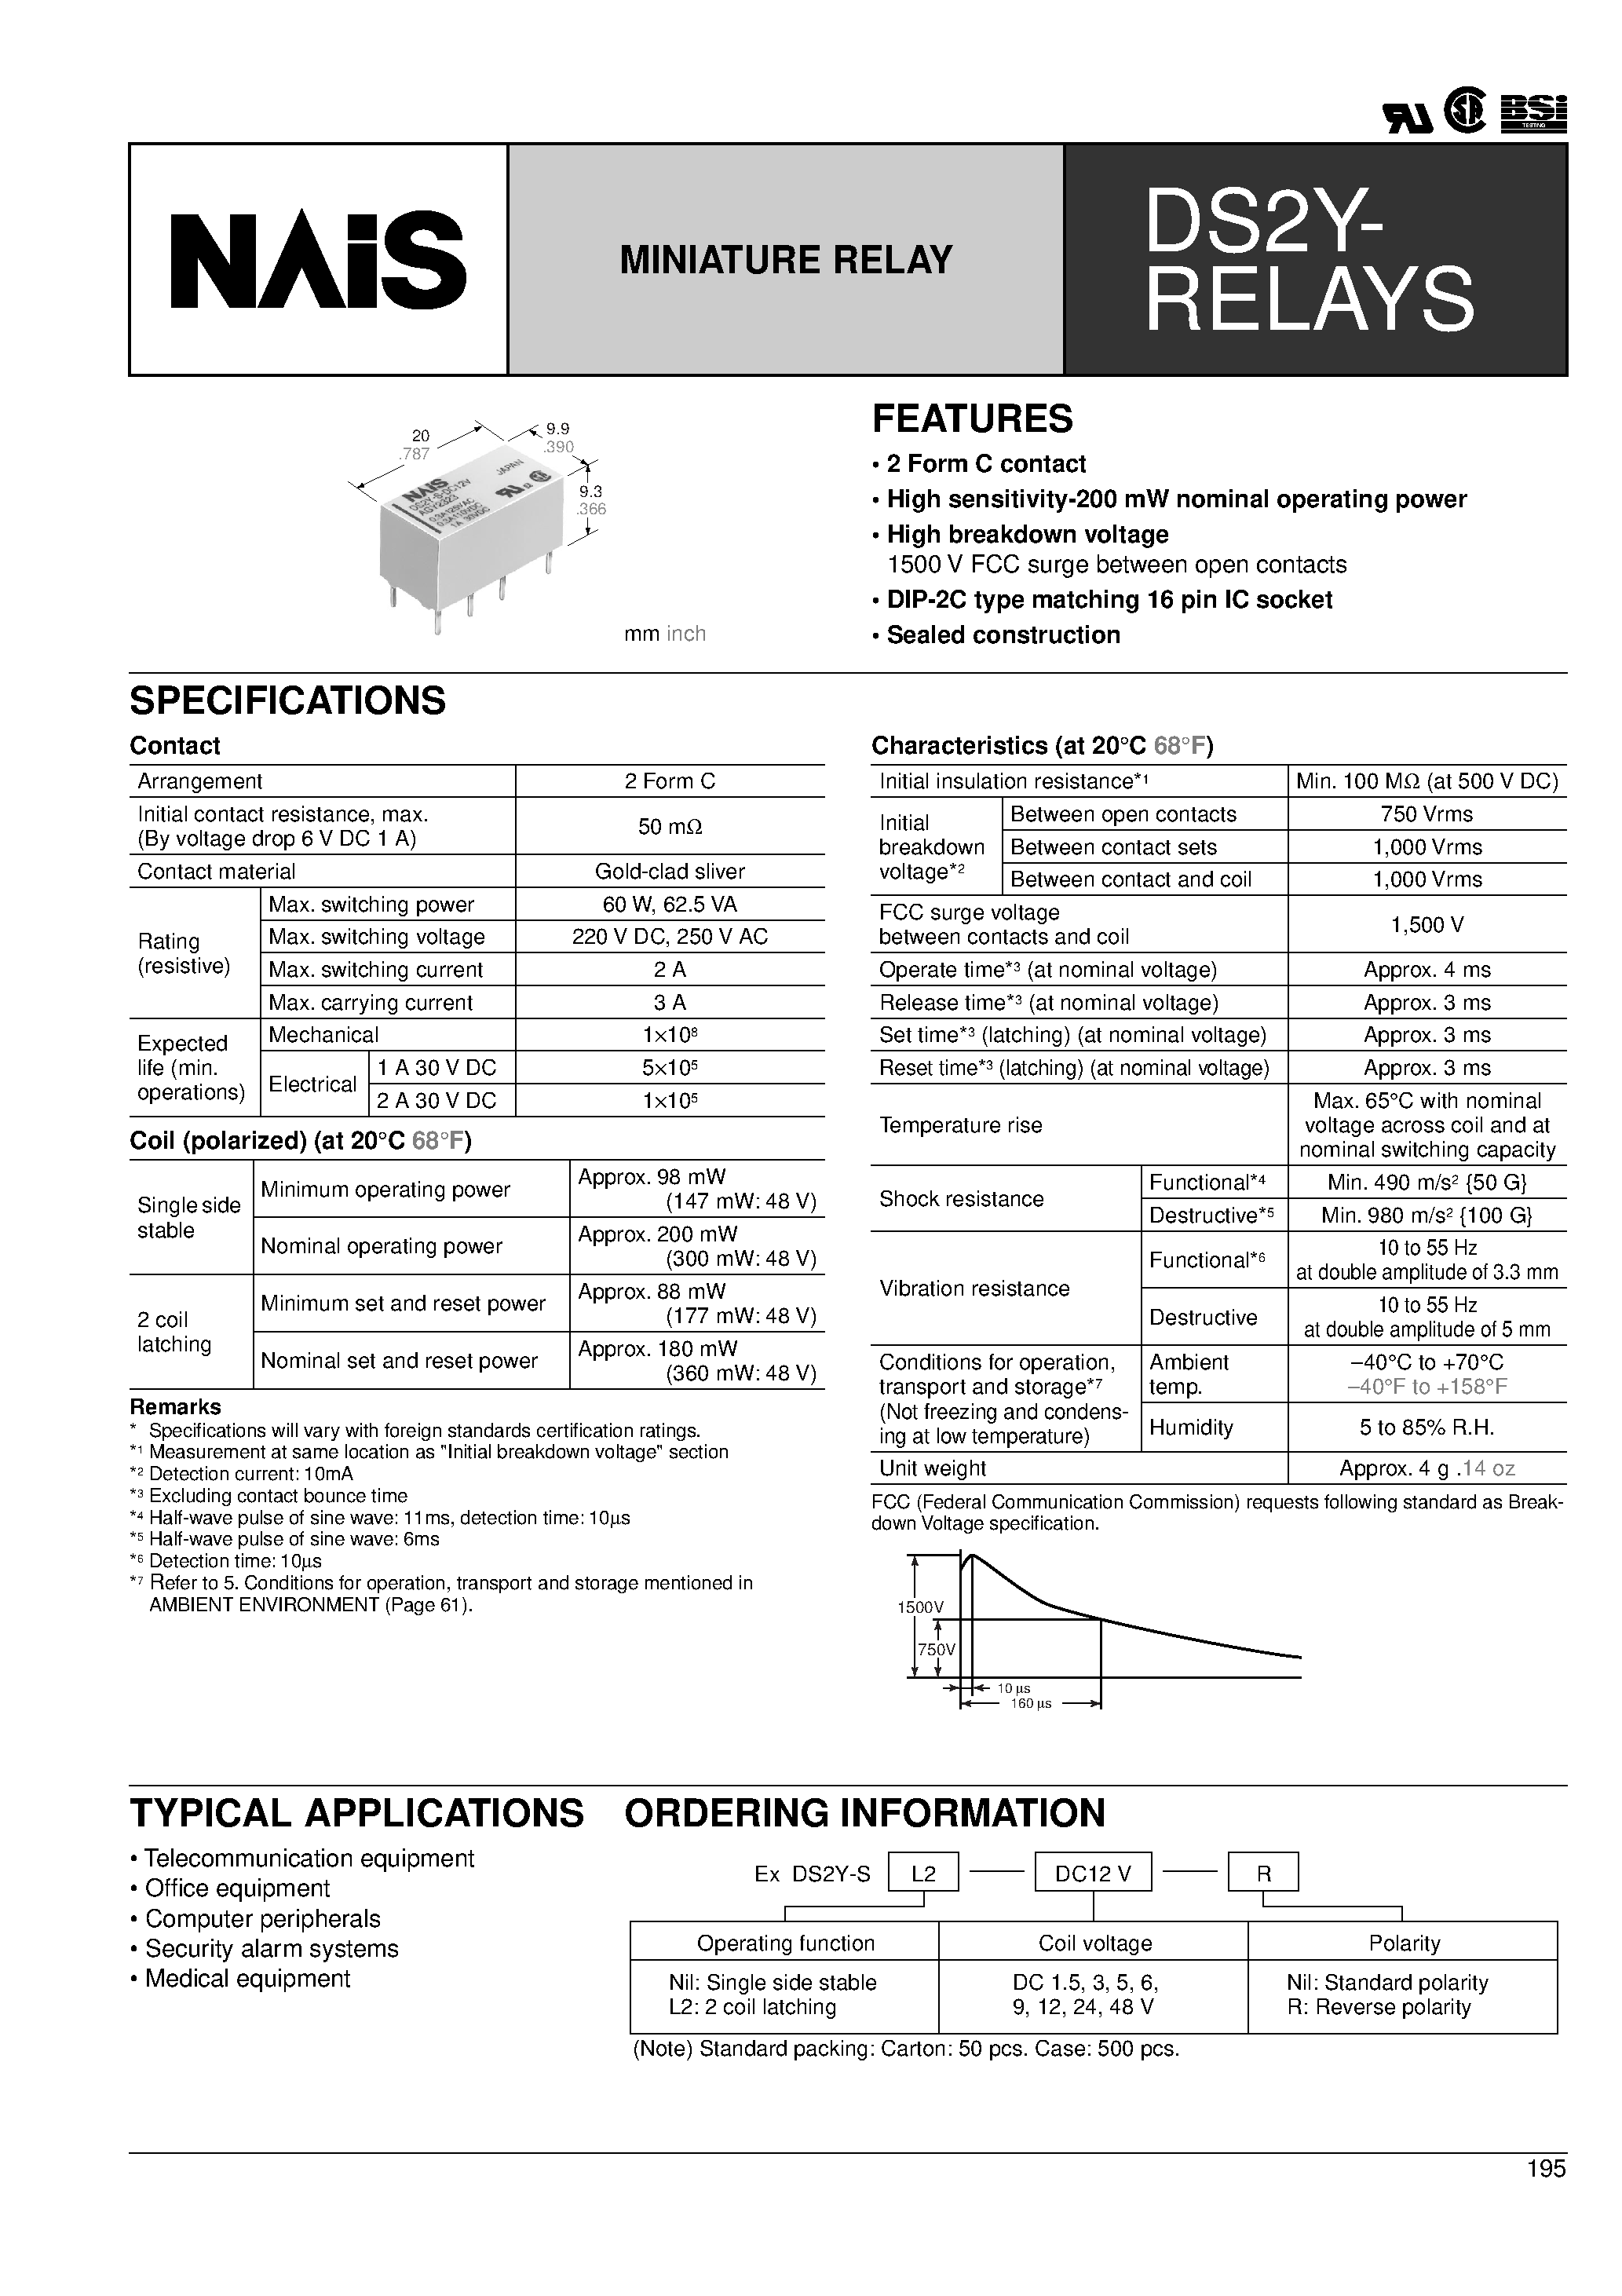 Datasheet DS2Y-SL2-DC48V - 2 Form C contact High sensitivity-200 mW nominal operating power page 1